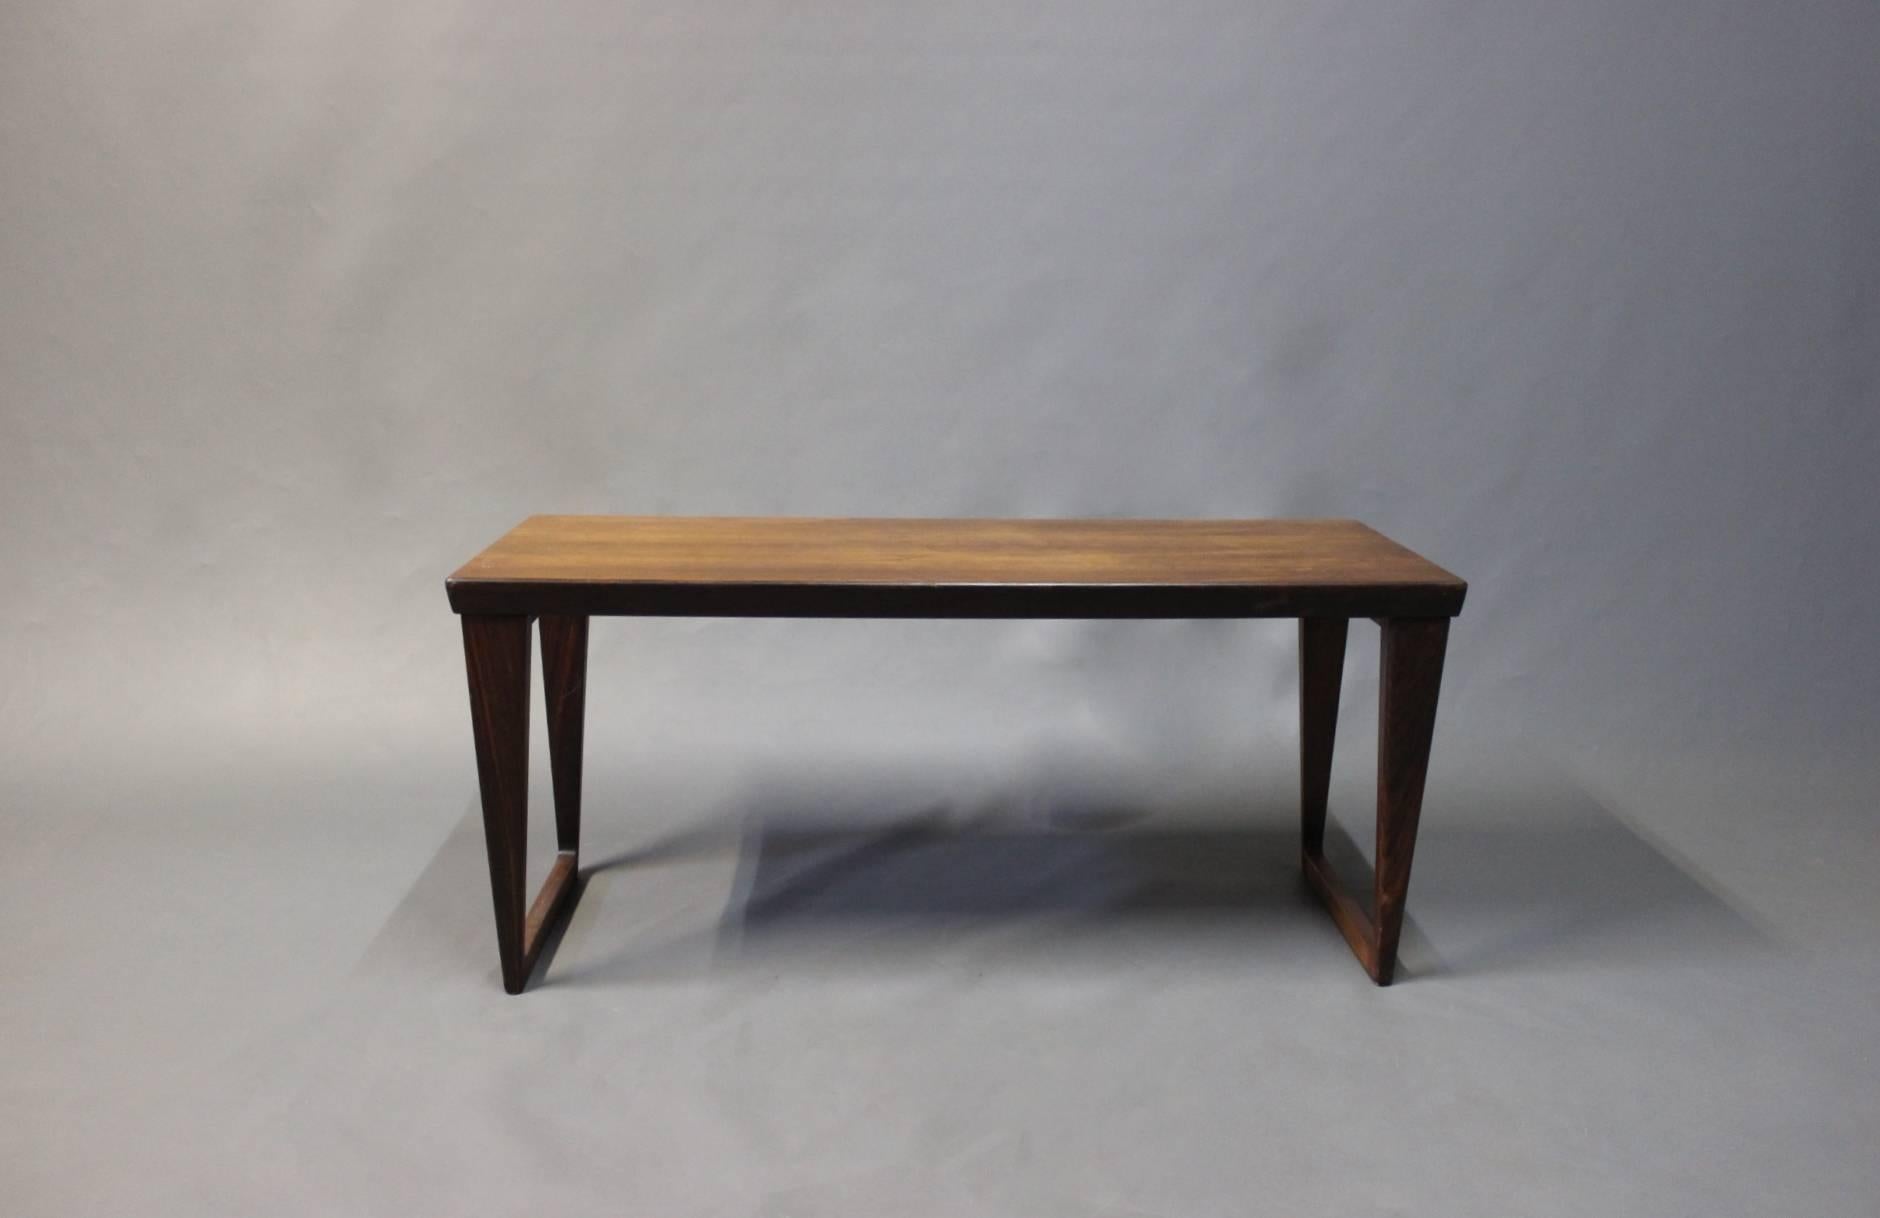 Small coffee or side table in rosewood of Danish design from the 1960s. The table is in good vintage condition.